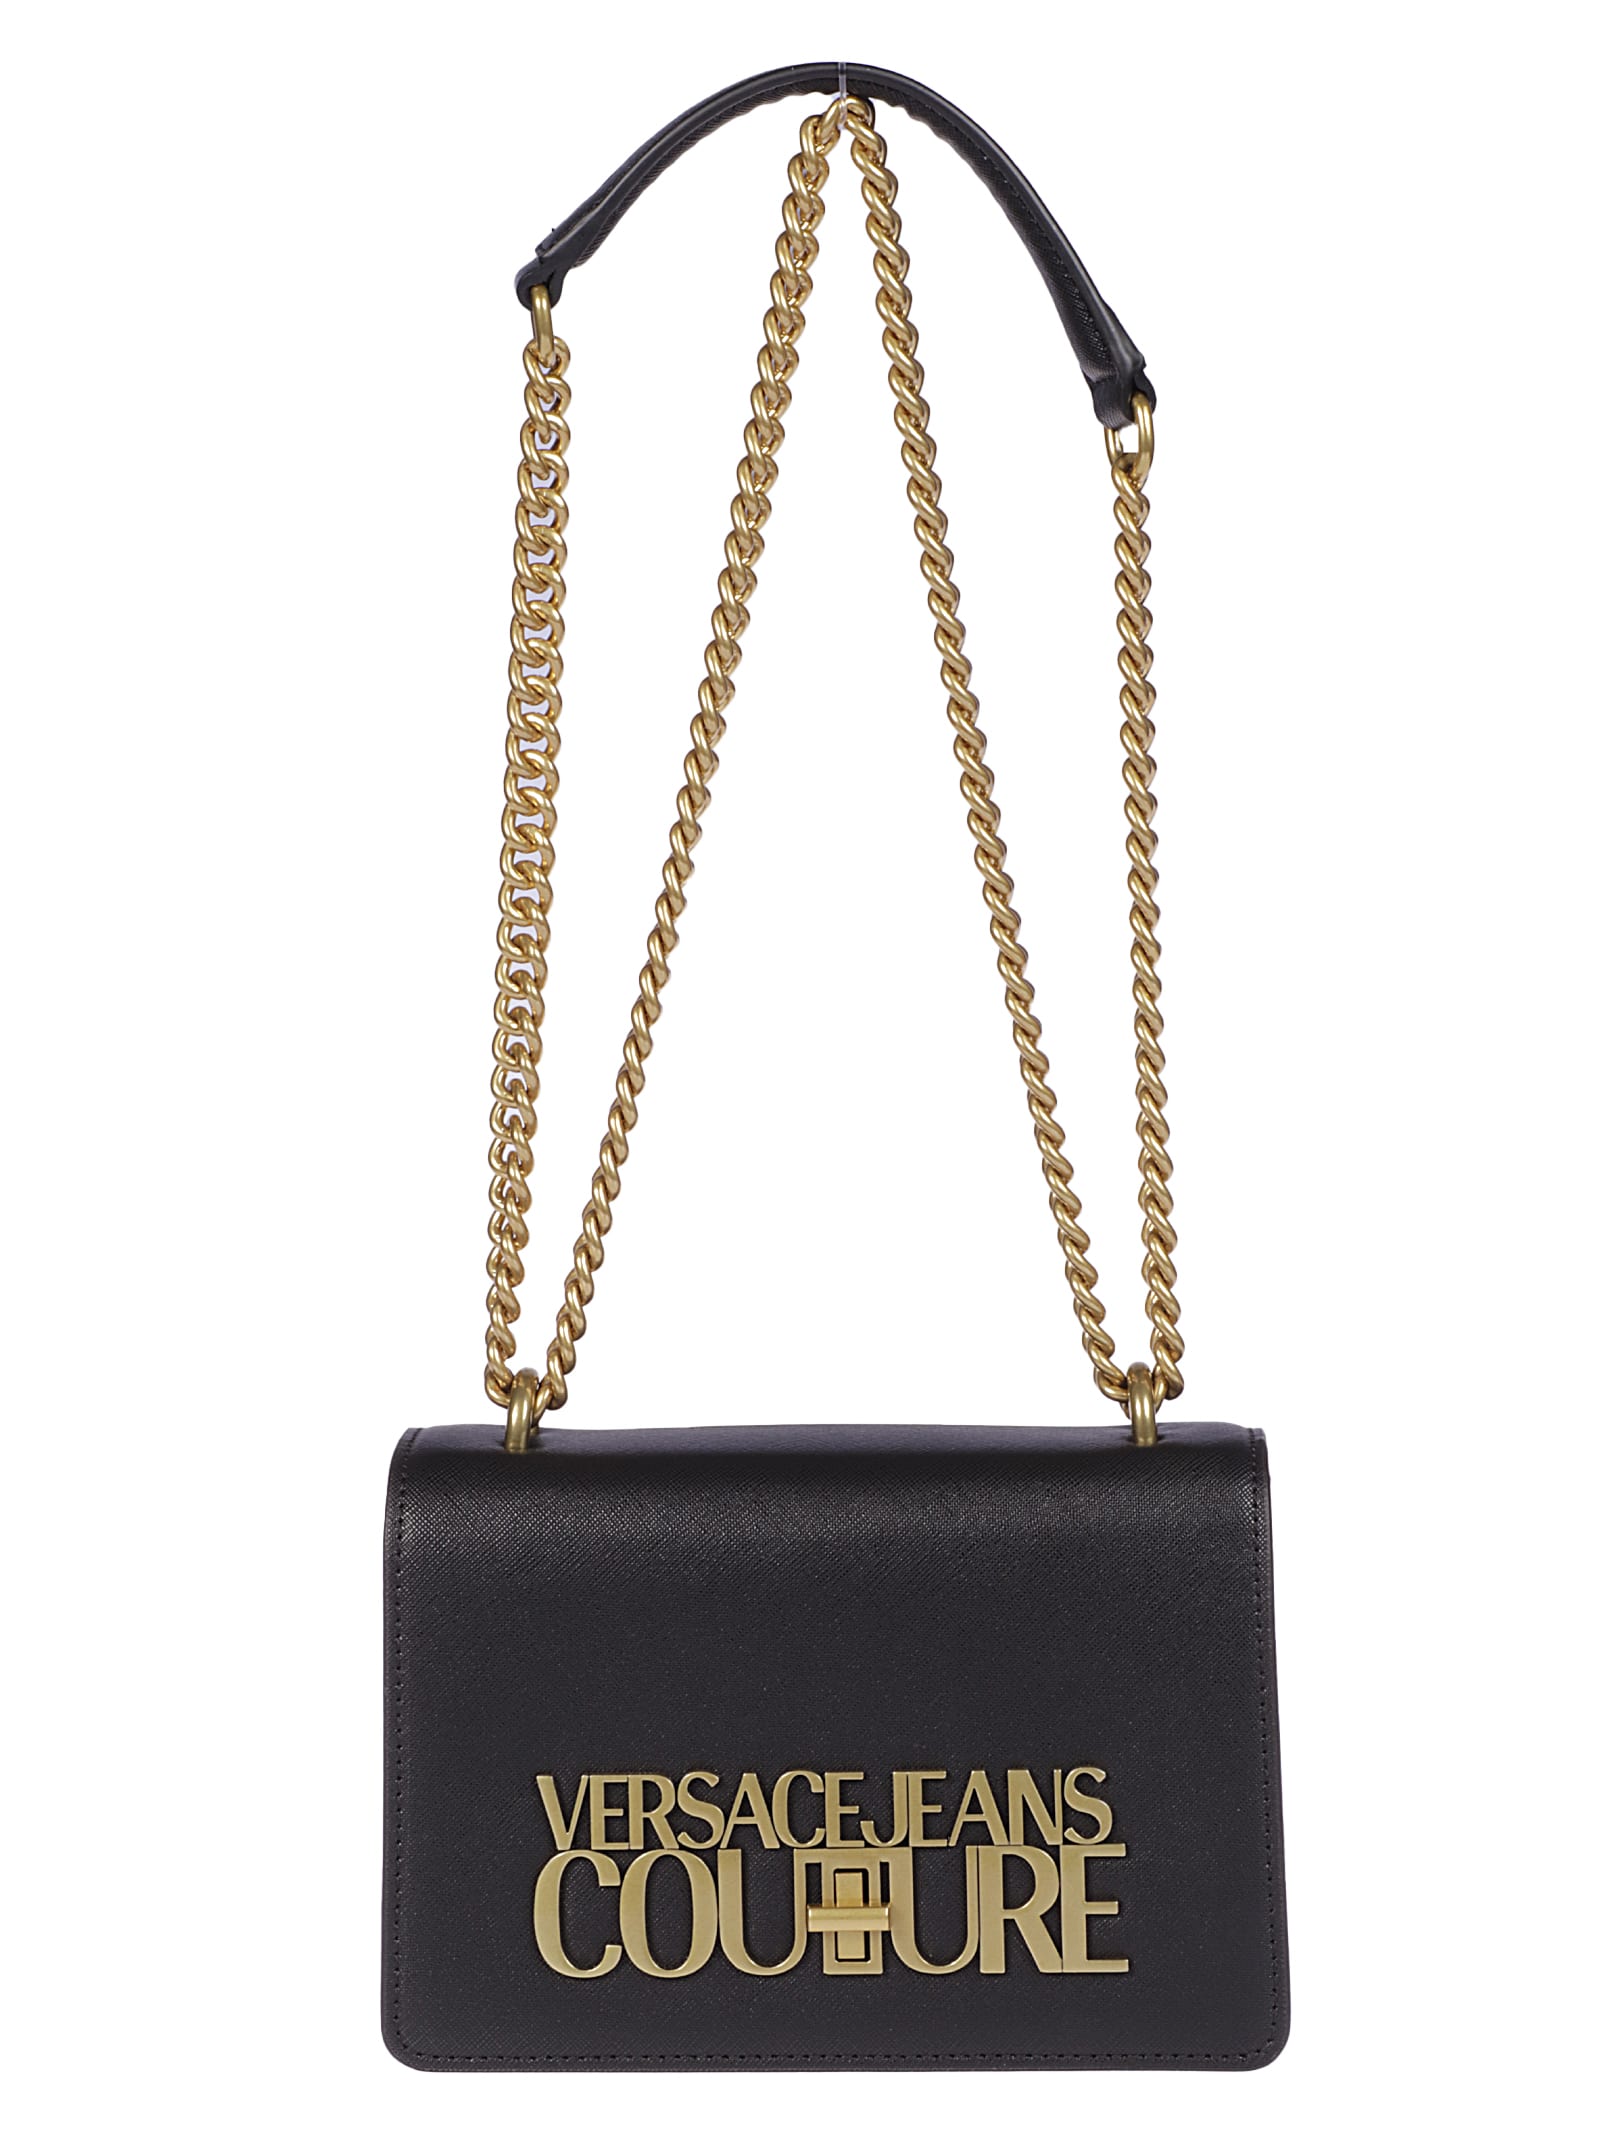 Versace Jeans Couture Sketch 1 Bags